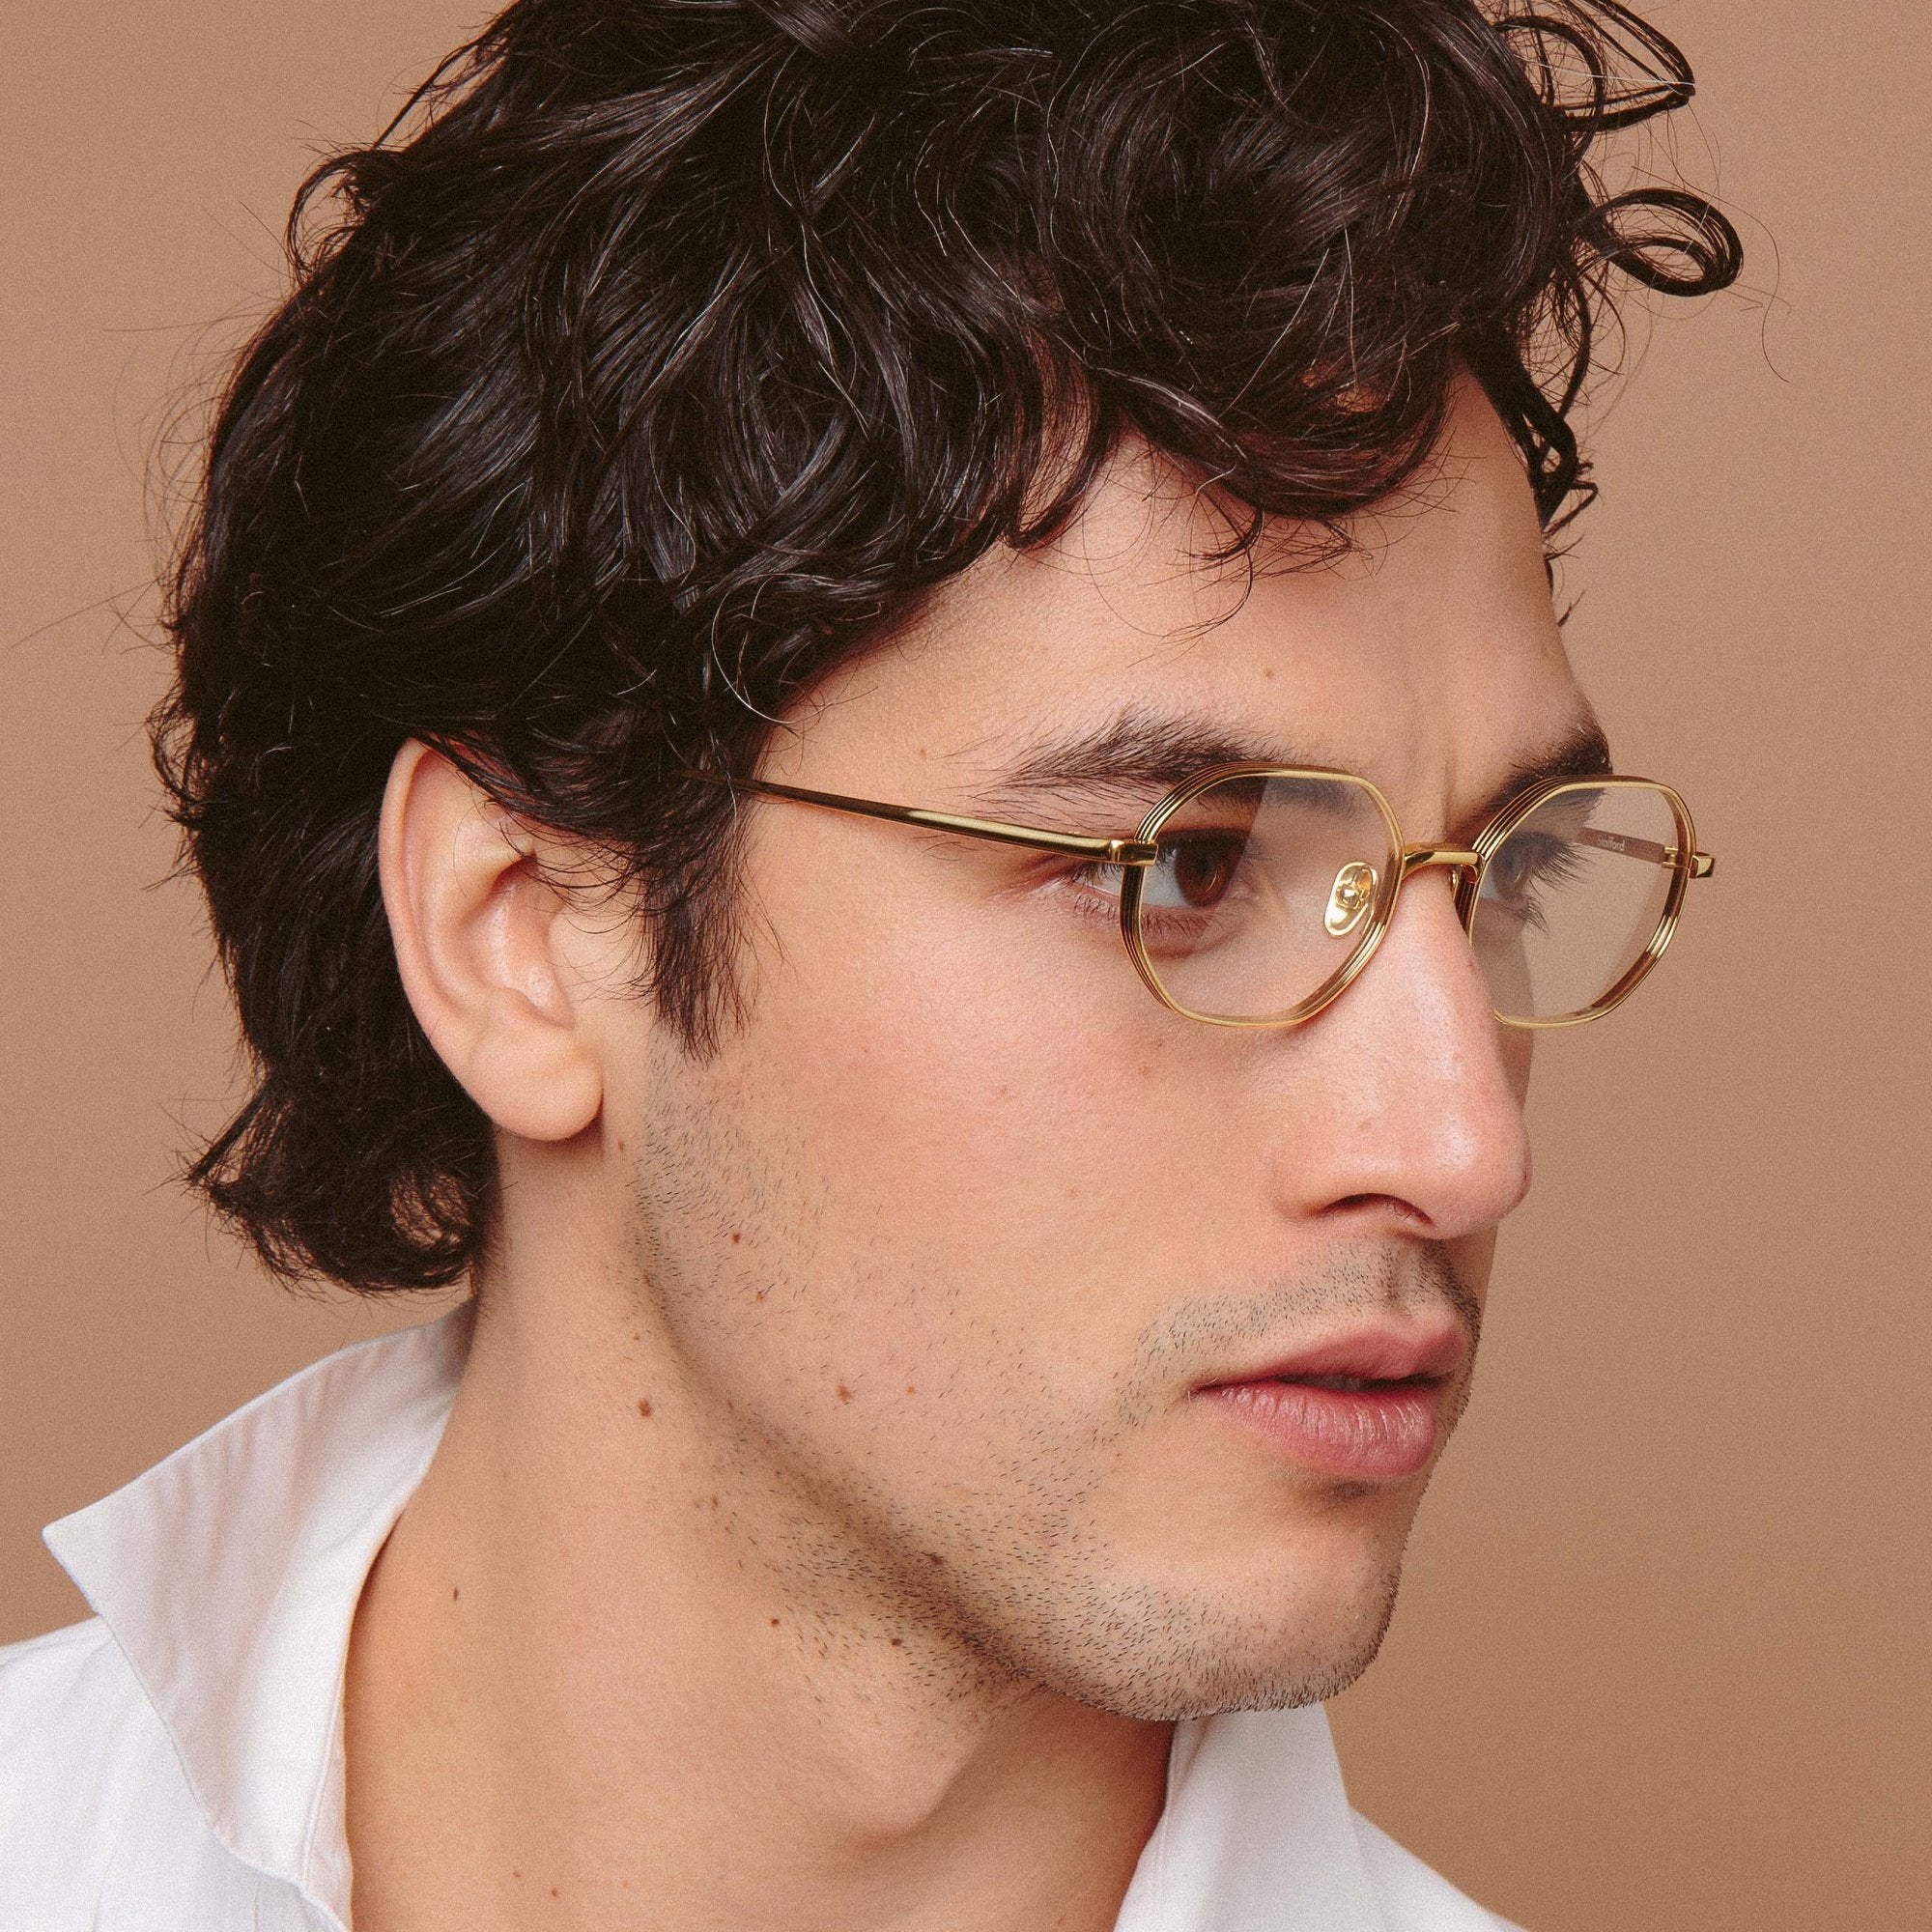 Color_LFL1195C1OPT - Stafford Angular Optical Frame in Yellow Gold